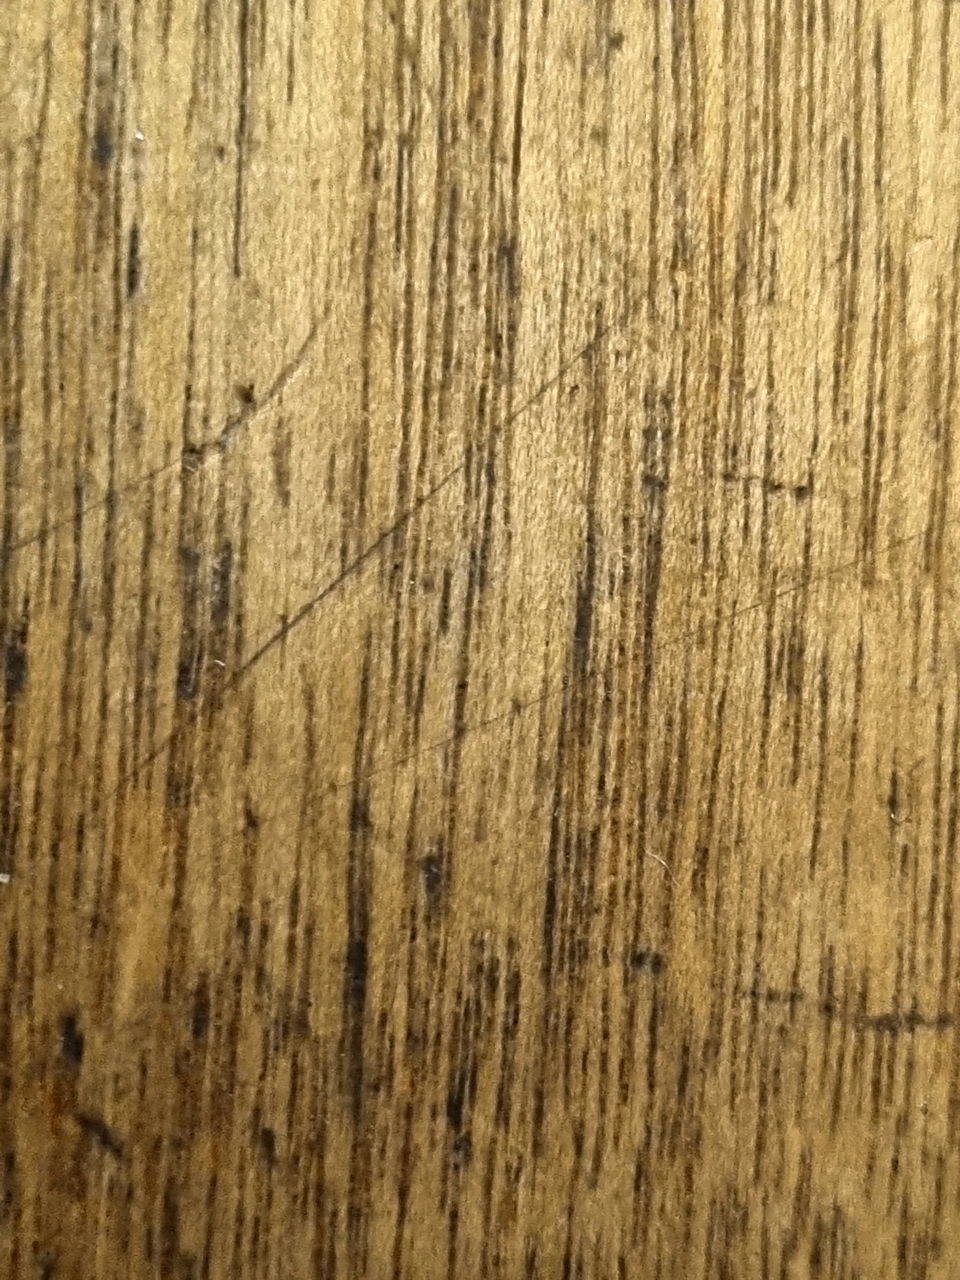 CLOSE-UP OF WOODEN PLANK